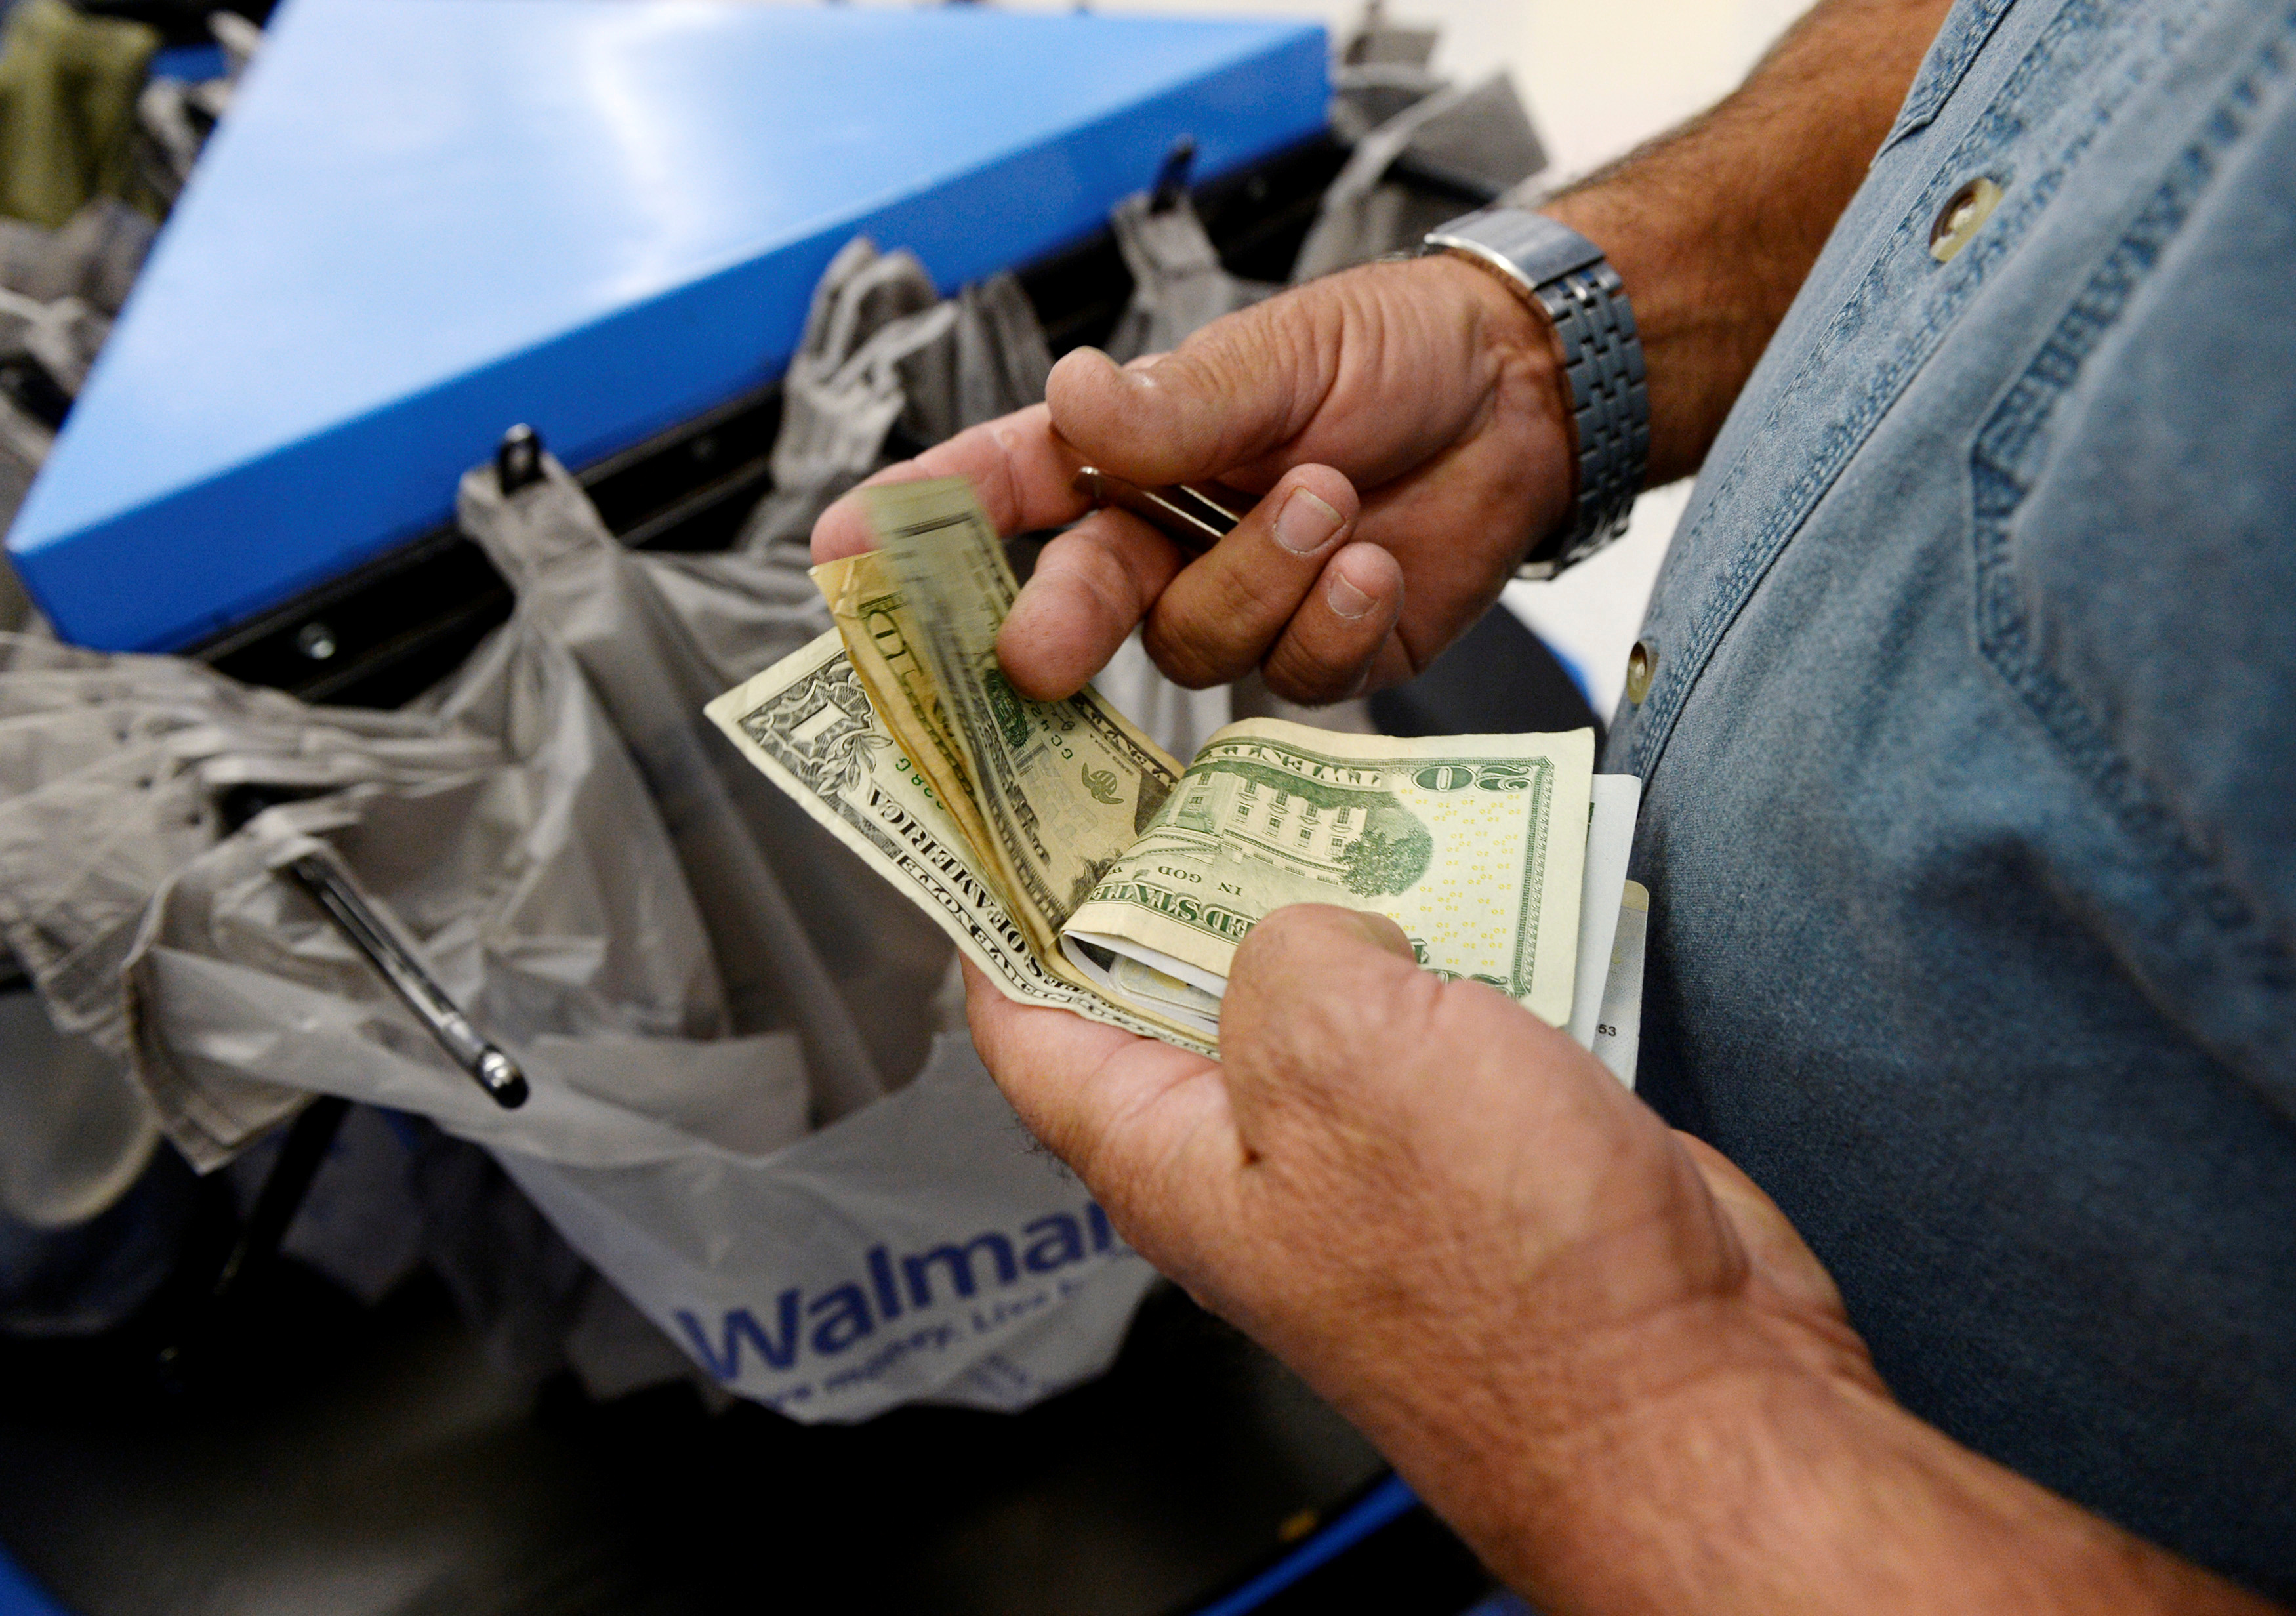 A customer counts his cash at the checkout lane of a Walmart store in the Porter Ranch section of Los Angeles